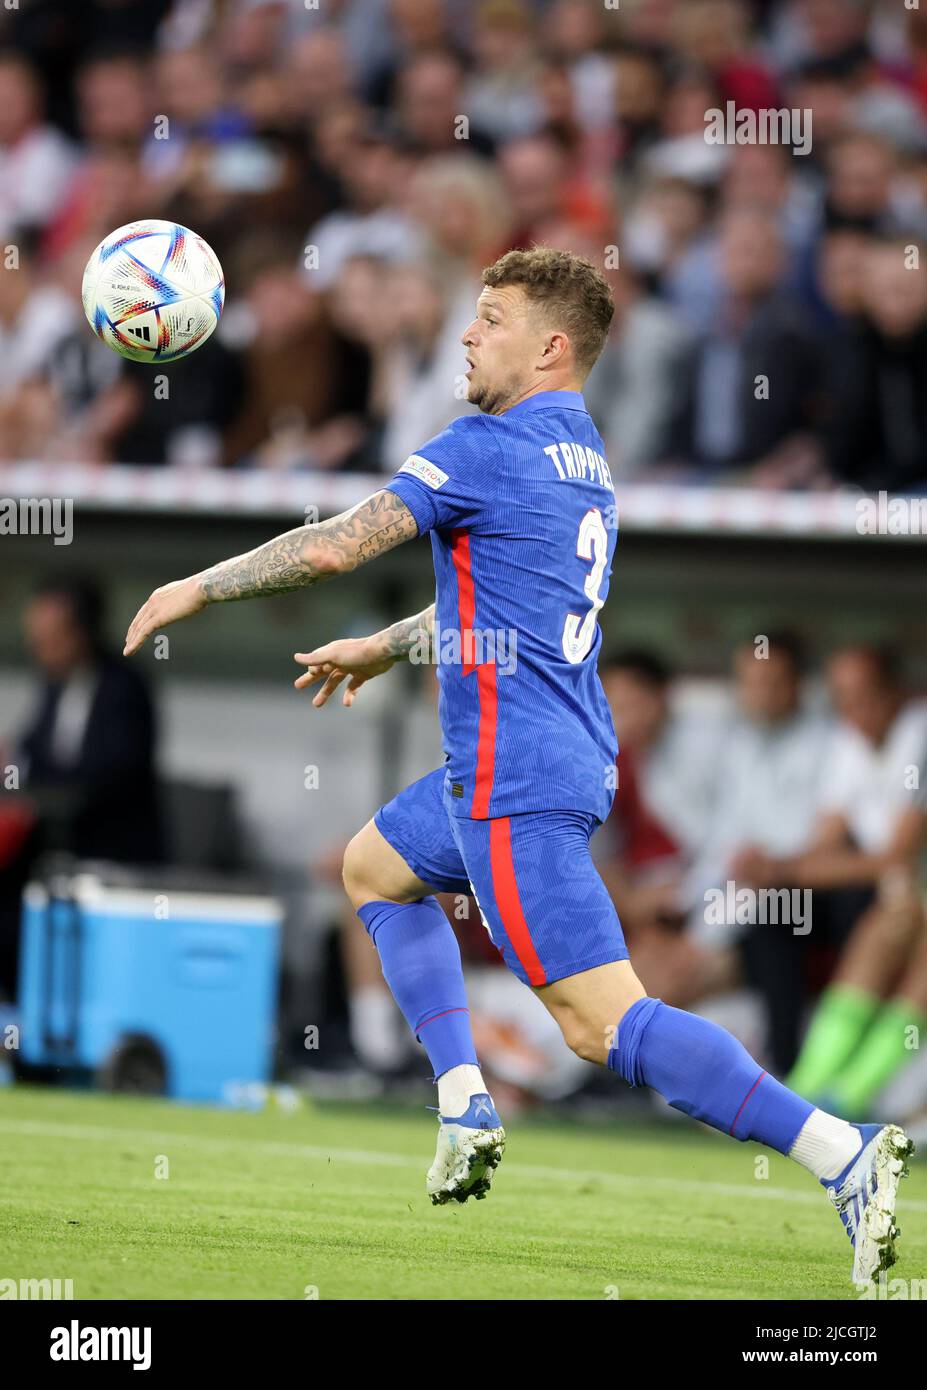 Kieran Trippier of England  MUNICH, GERMANY - JUNE 07:  UEFA Nations League League A Group 3 match between Germany and England at Allianz Arena on June 07, 2022 in Munich, Germany. Nations League Deutschland England  © diebilderwelt / Alamy Stock Stock Photo